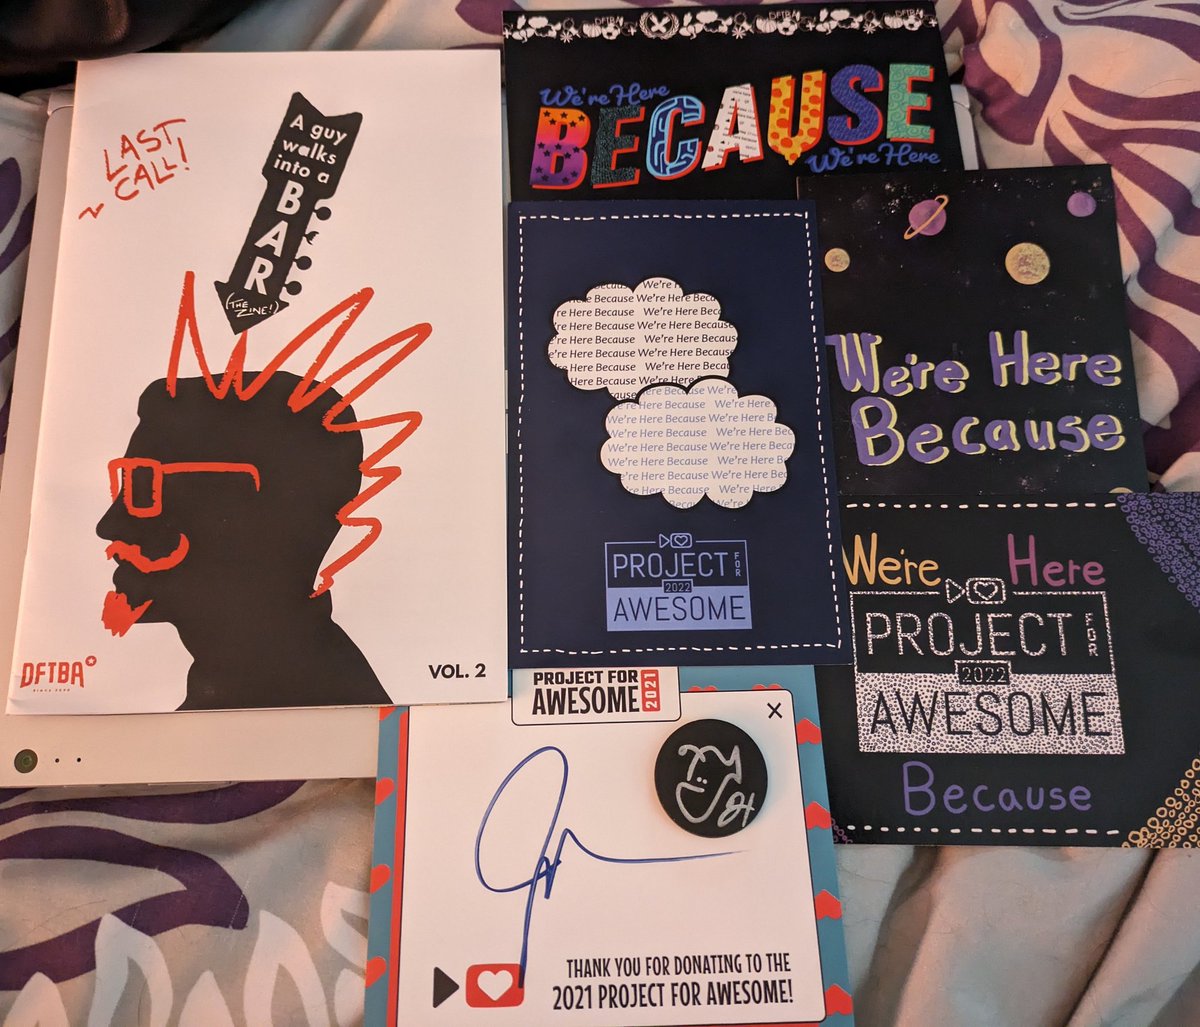 I just got my P4A past bundle from #P4A2024 and I love the things in it so much! There's a variety of we're here because themed things, a Nerdfighter art zone, and a little something signed by both Hank and John! Thank you @DFTBArecords for always remembering to be awesome! 💖